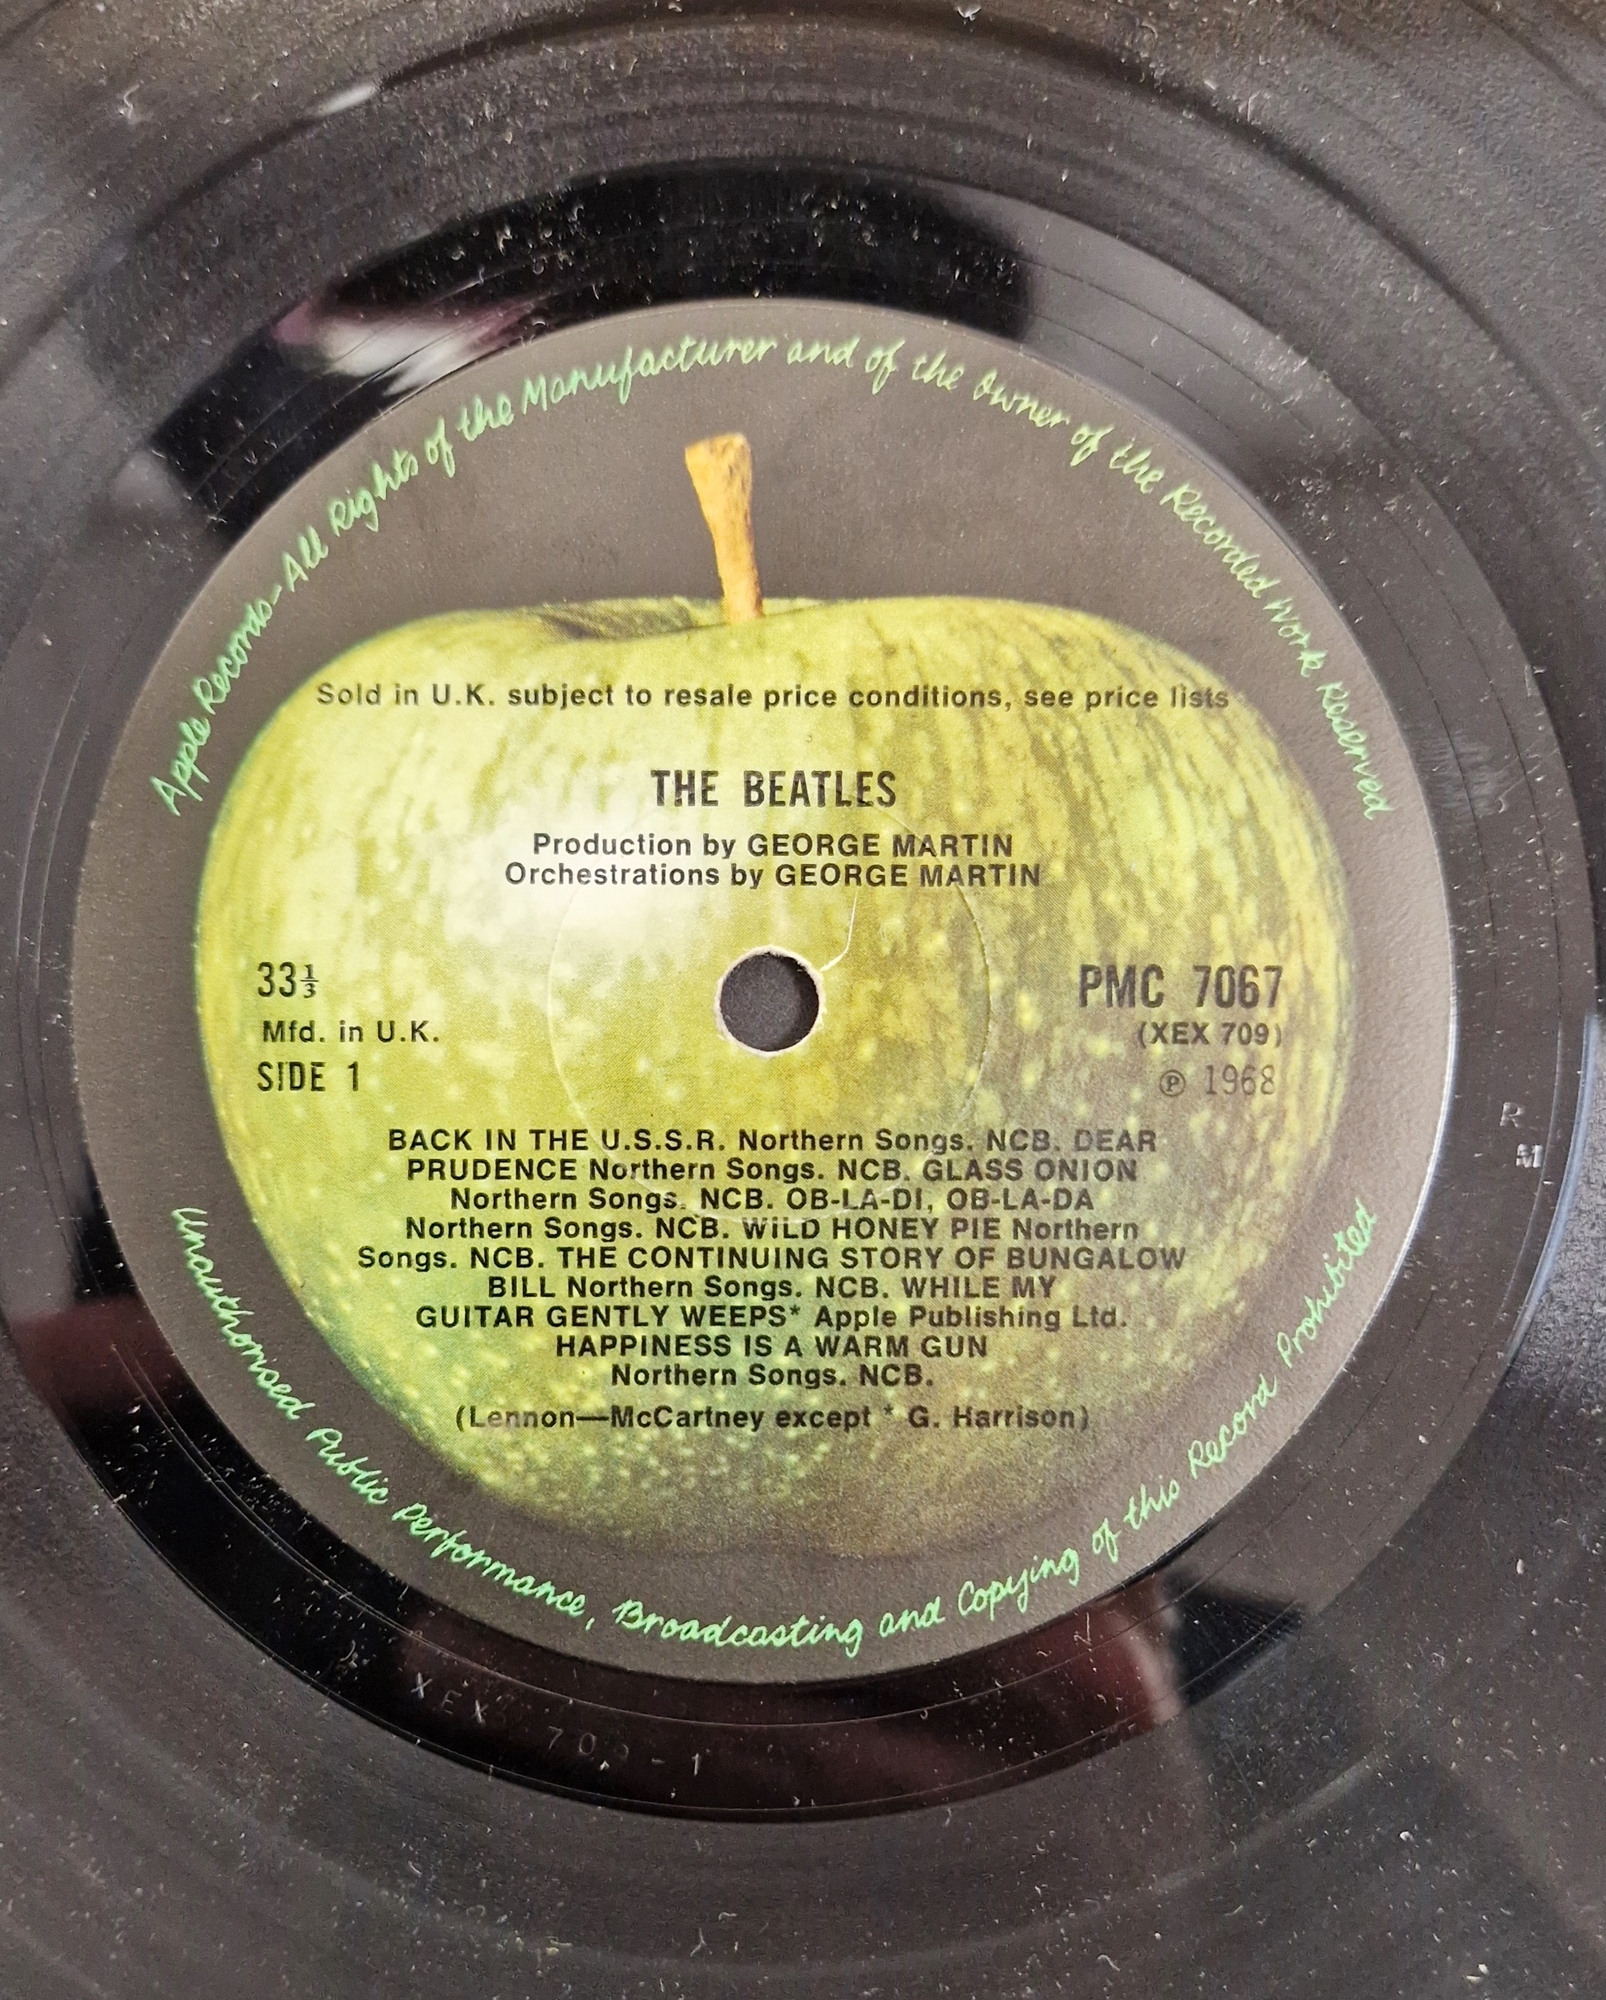 The Beatles, The Beatles (The White Album) PMC7067 (XEX-709/710/711/712-1), Misprint: does not - Image 4 of 10